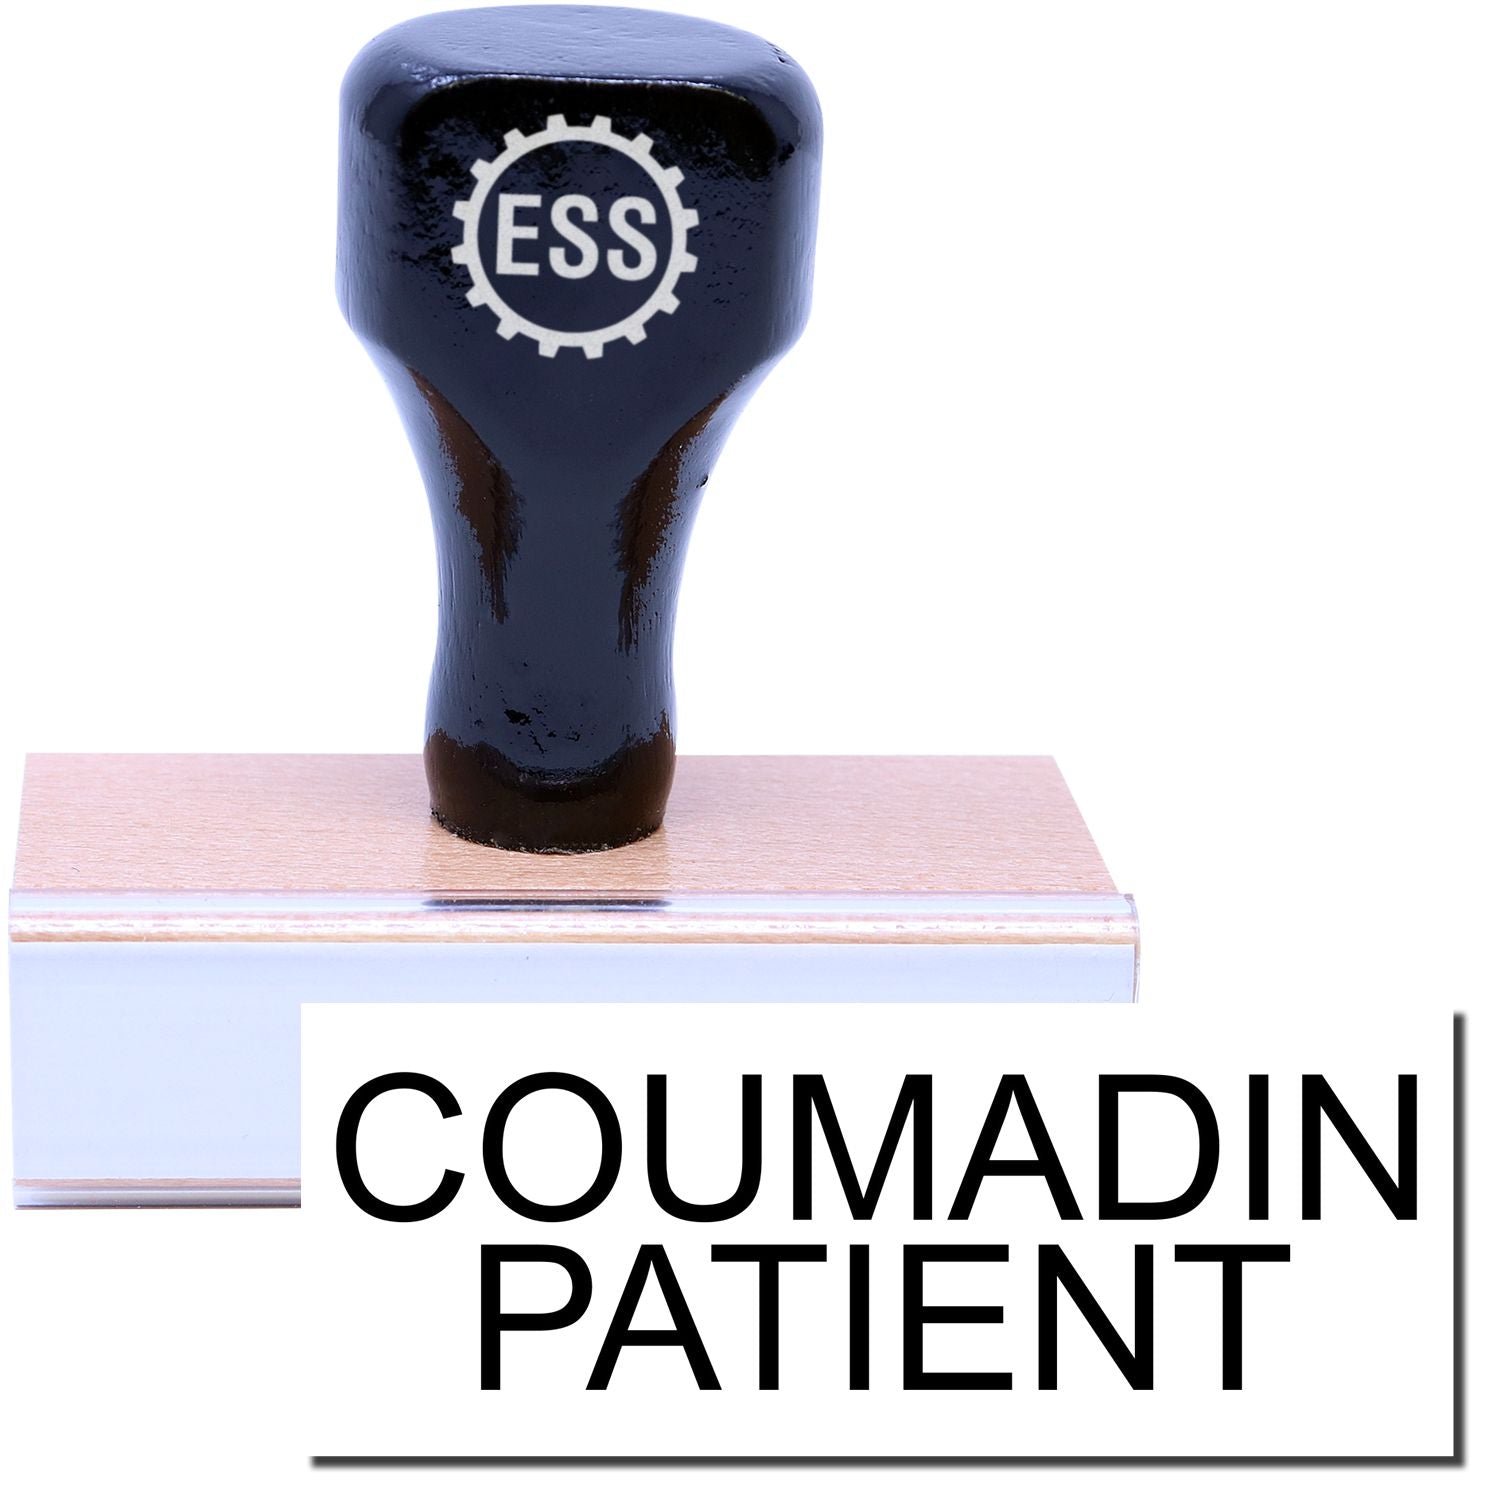 A stock office rubber stamp with a stamped image showing how the text "COUMADIN PATIENT" is displayed after stamping.